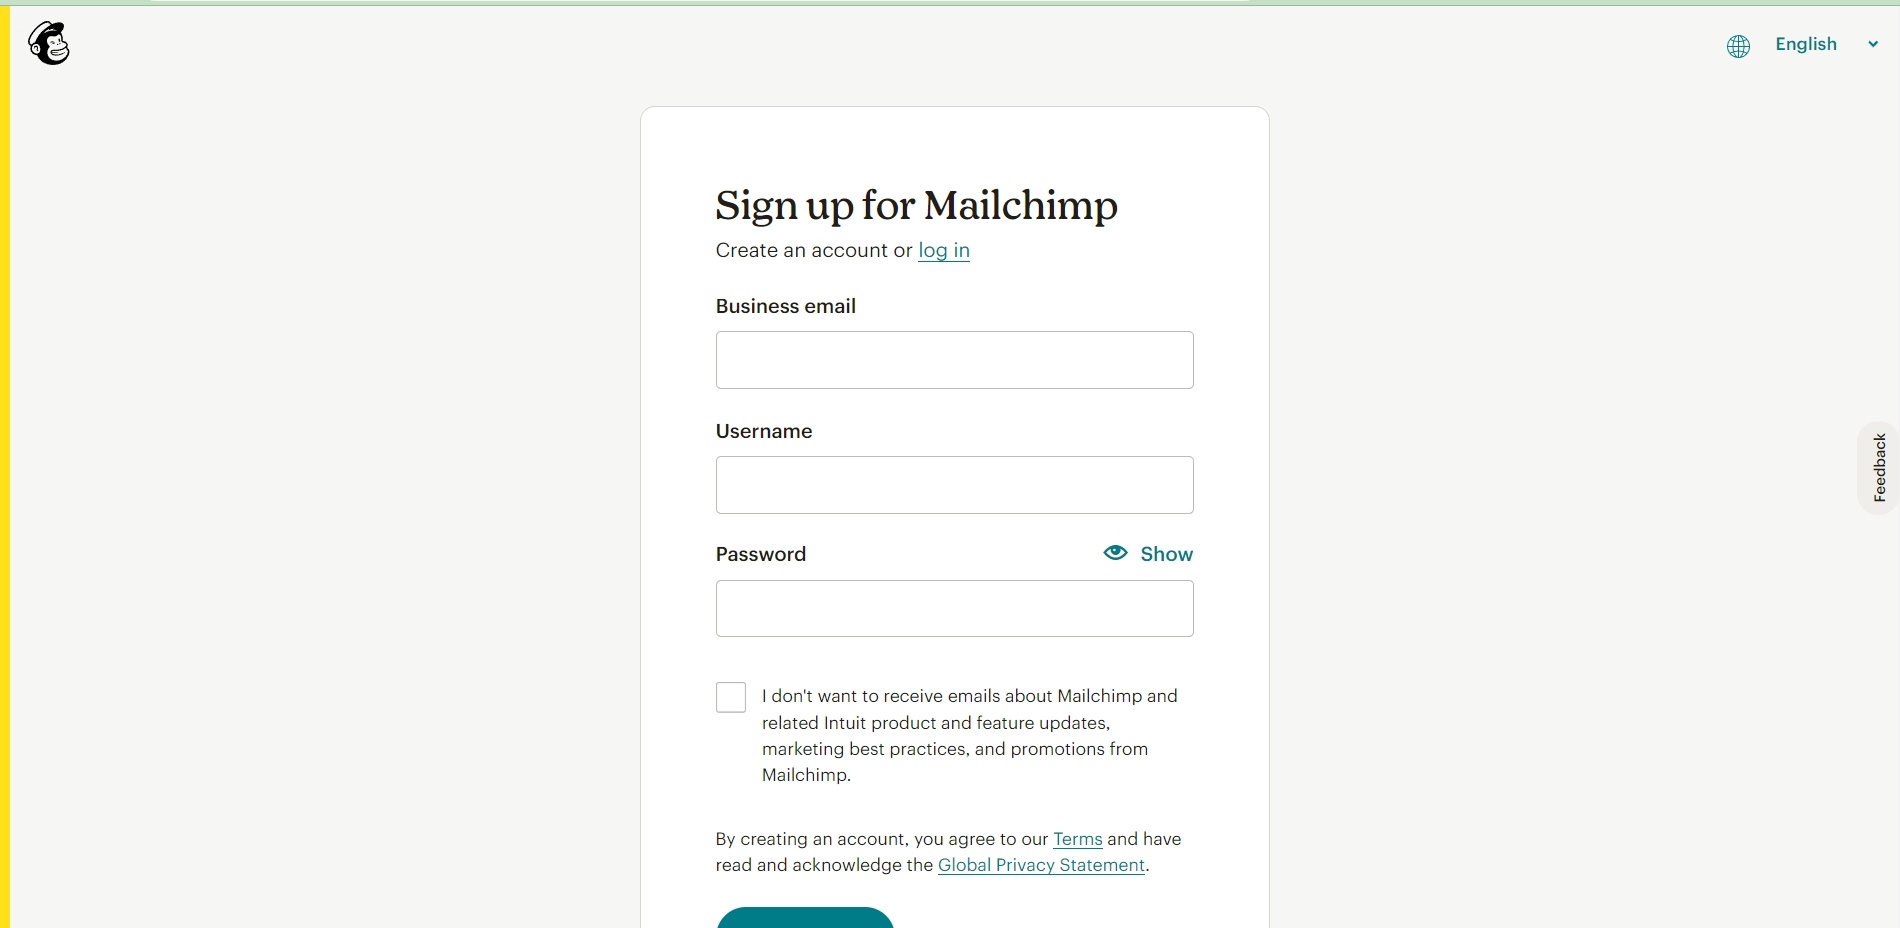 Mailchimp tells people to sign up by entering their email address and other details